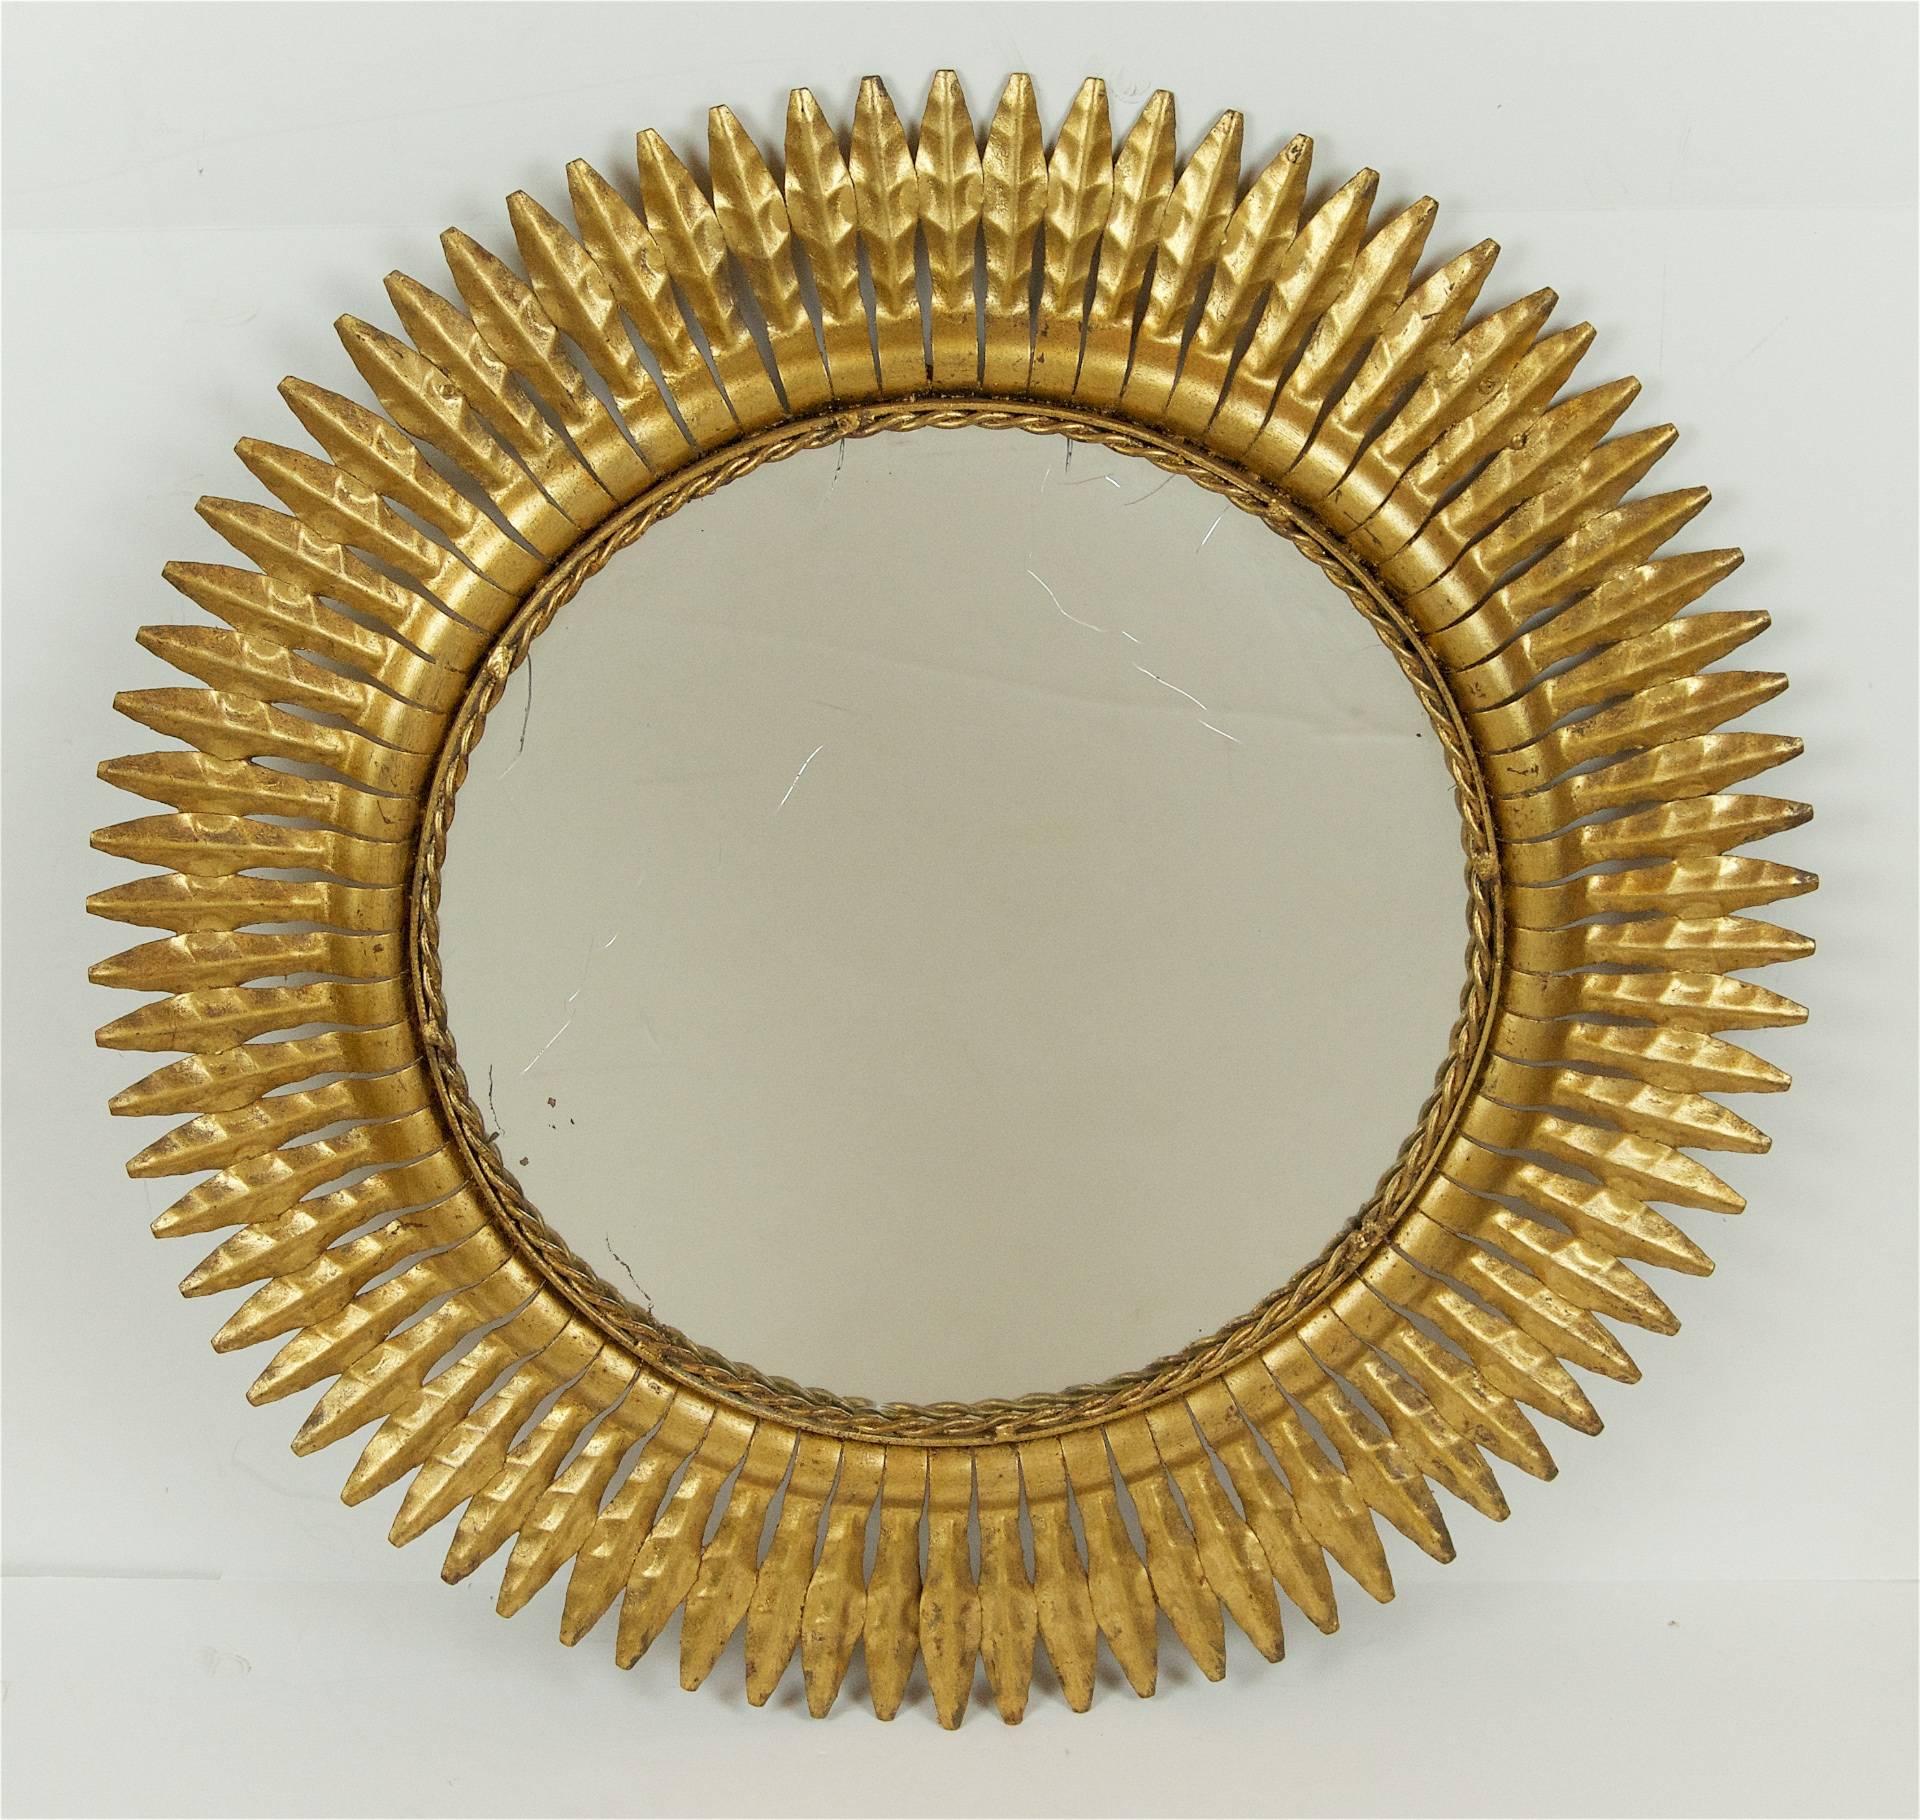 Midcentury German floral gilt mirror of excellent size and finish.